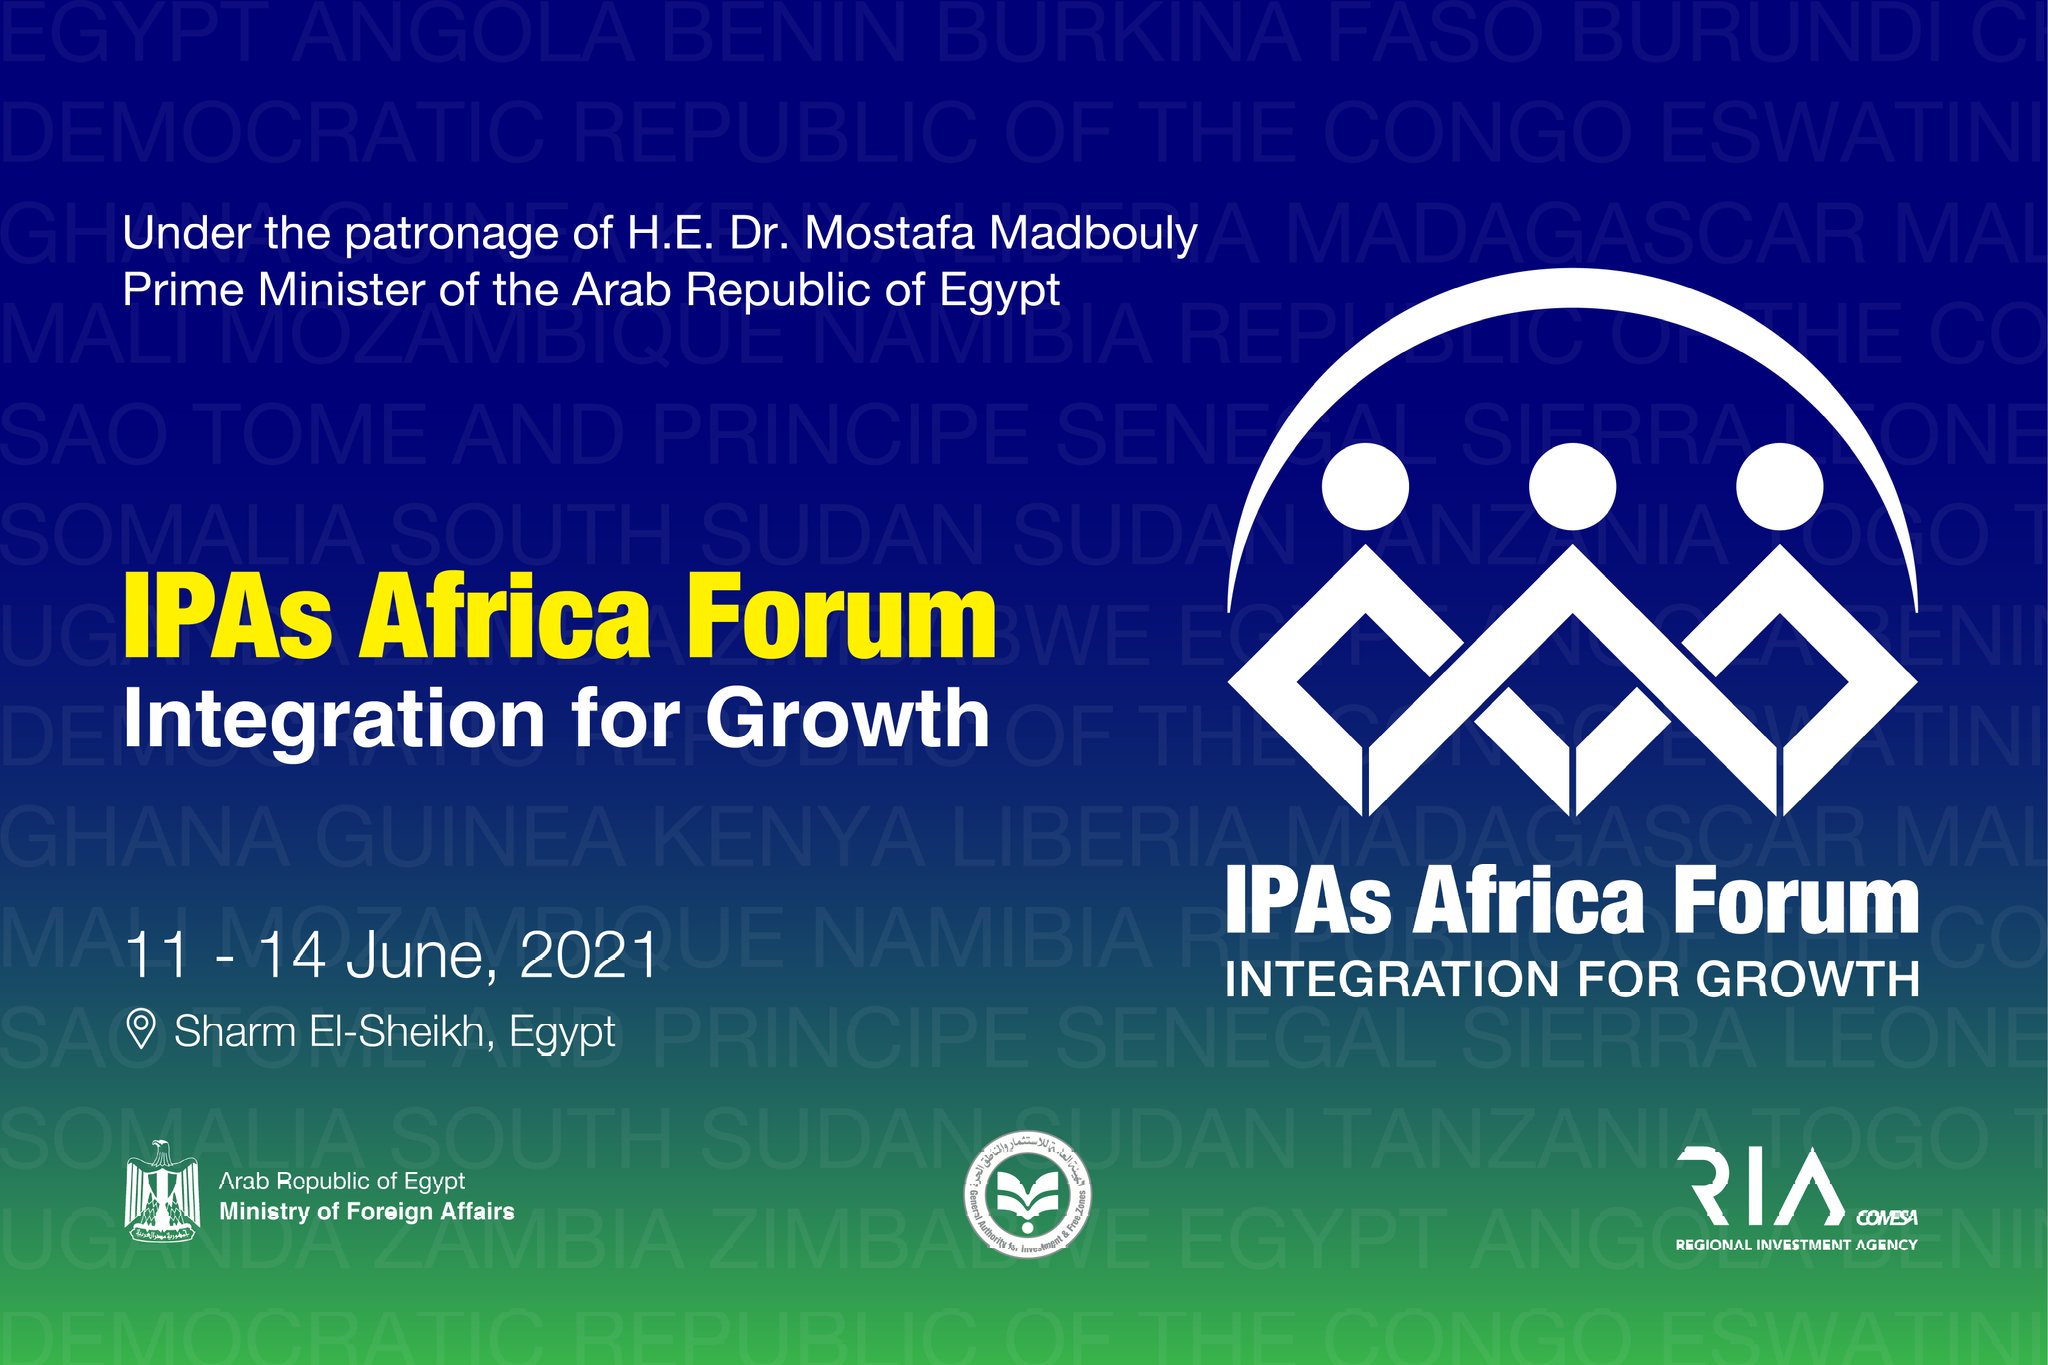 APIP-Guinea at the IPAs Africa Forum in Sharm El Sheikh (Egypt)